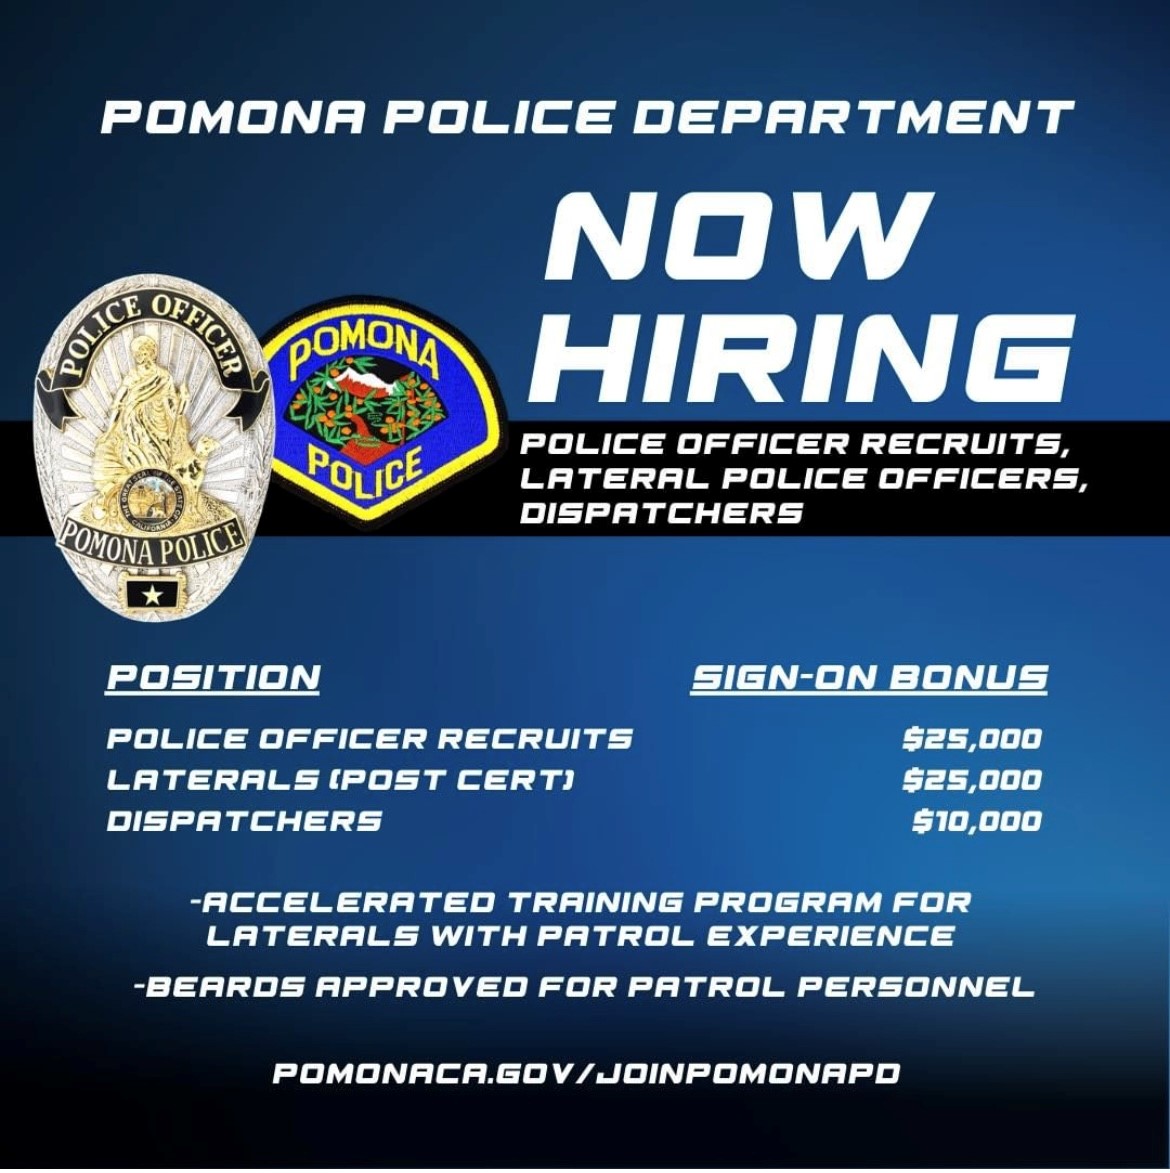 blue poster, pomona police department hiring police recruits, dispatchers, and laterals